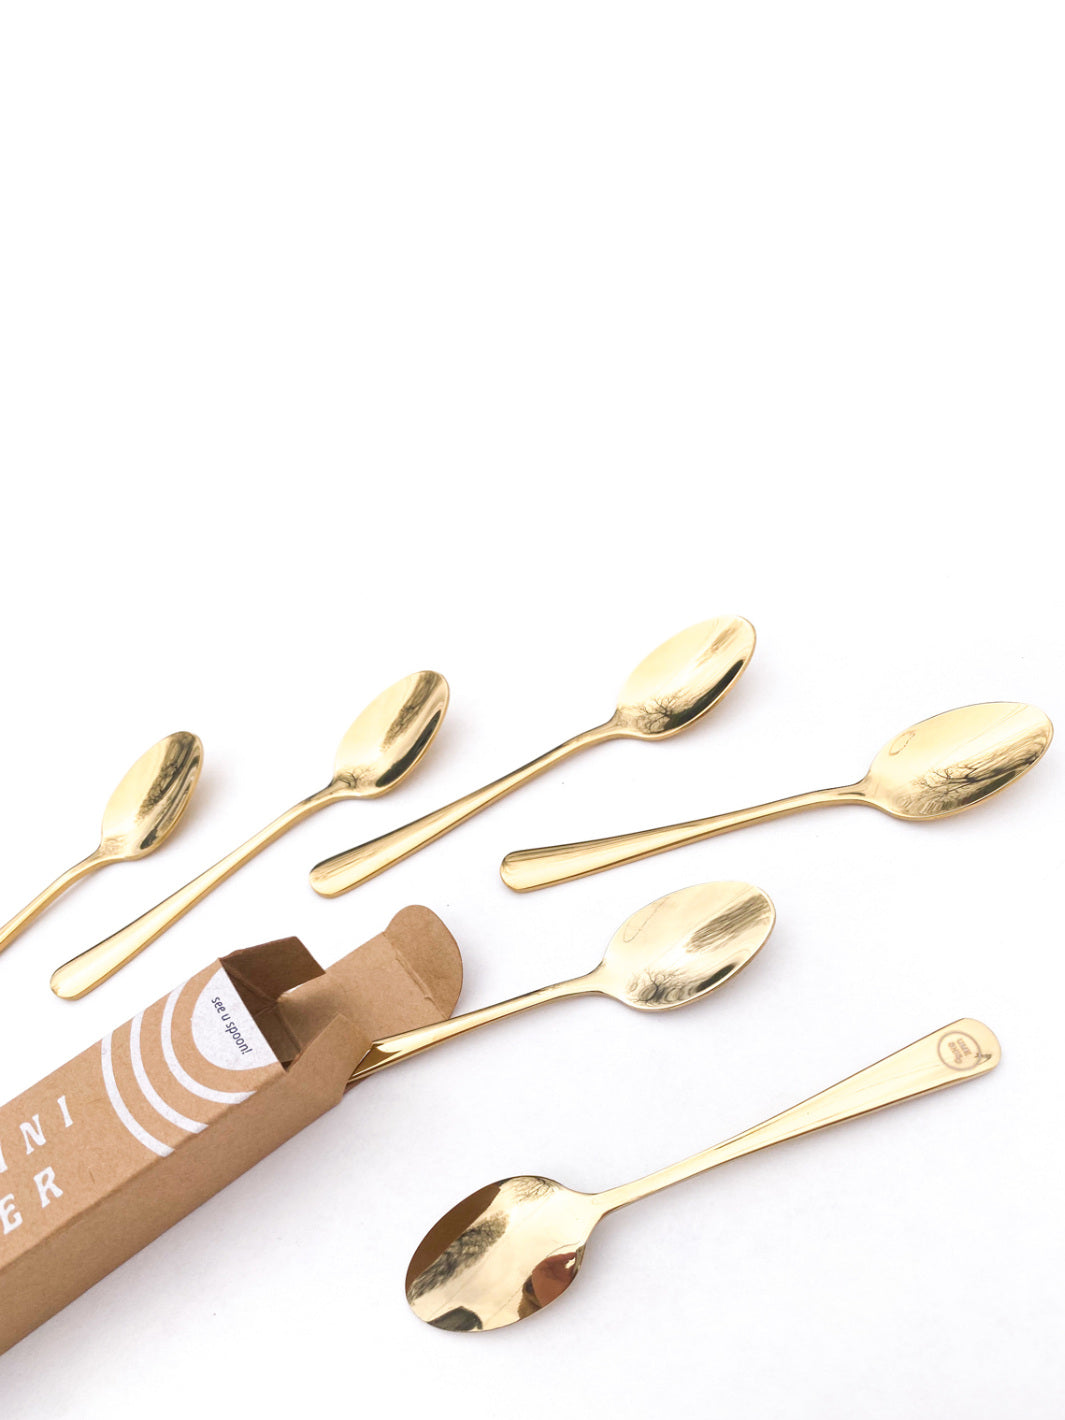 Umeshiso Little Dipper Cupping Spoon – Huset